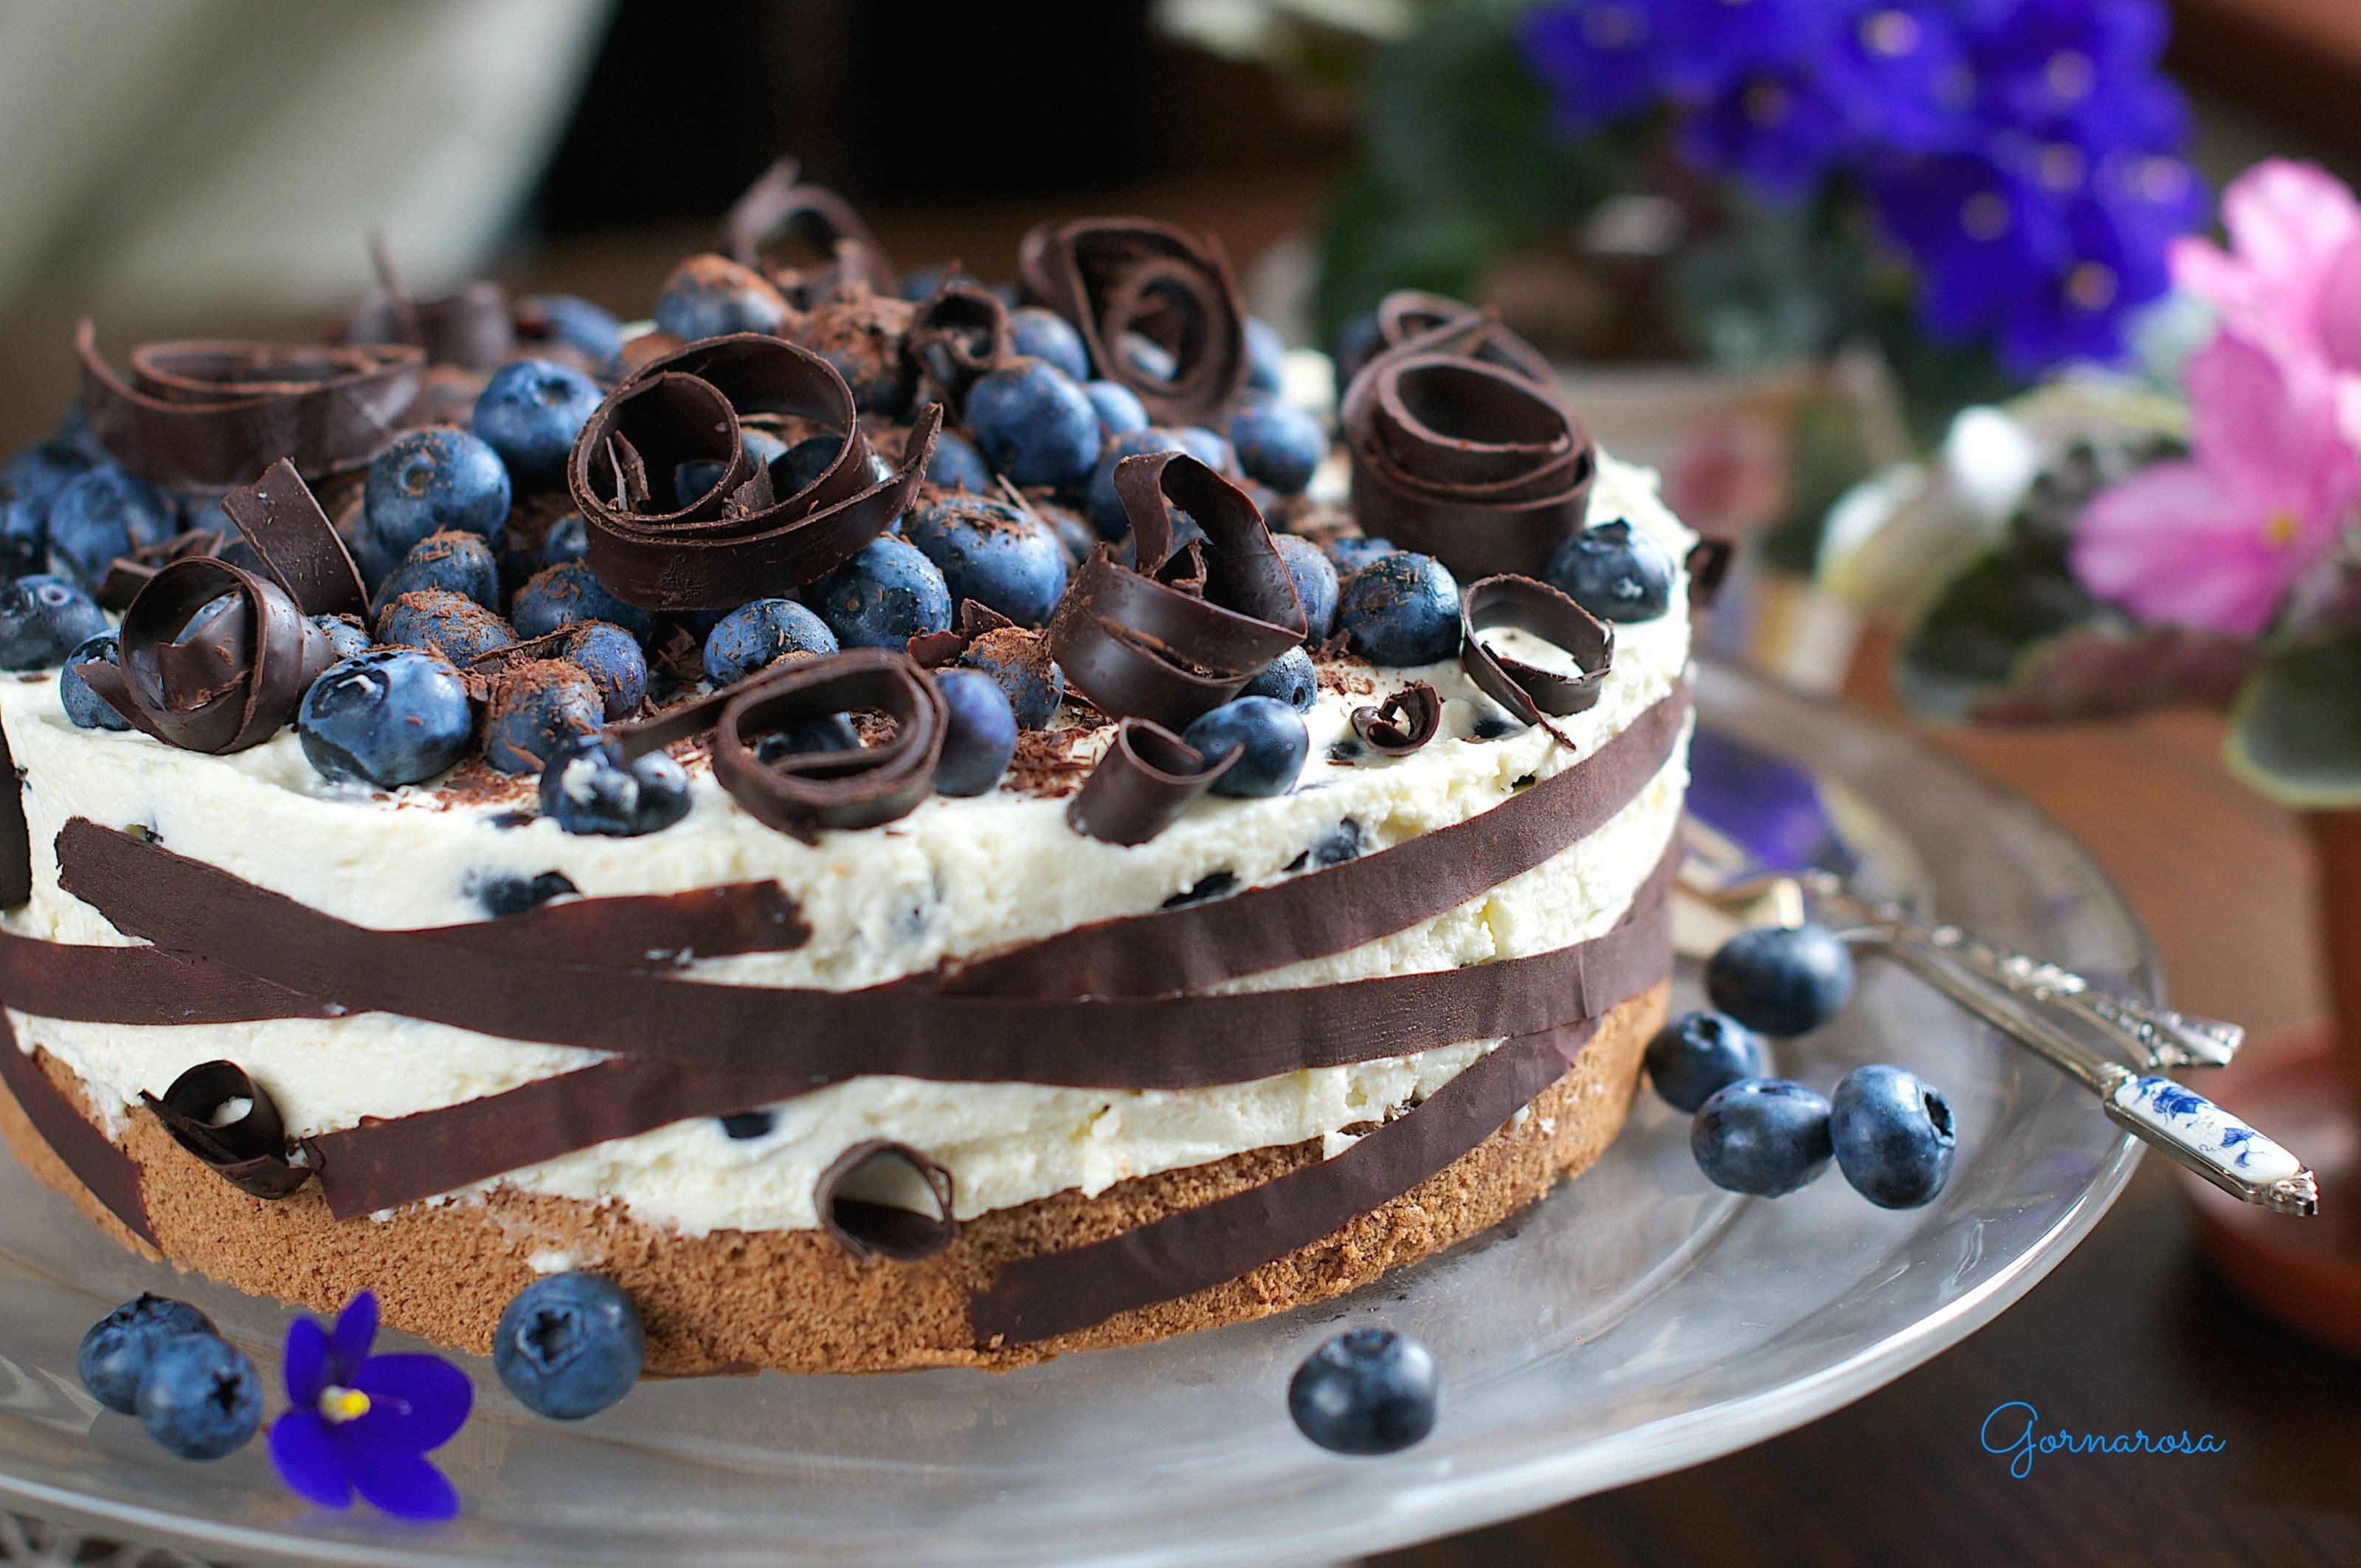 *** Delicious cake ***, chocolate cake with blueberries, sweet